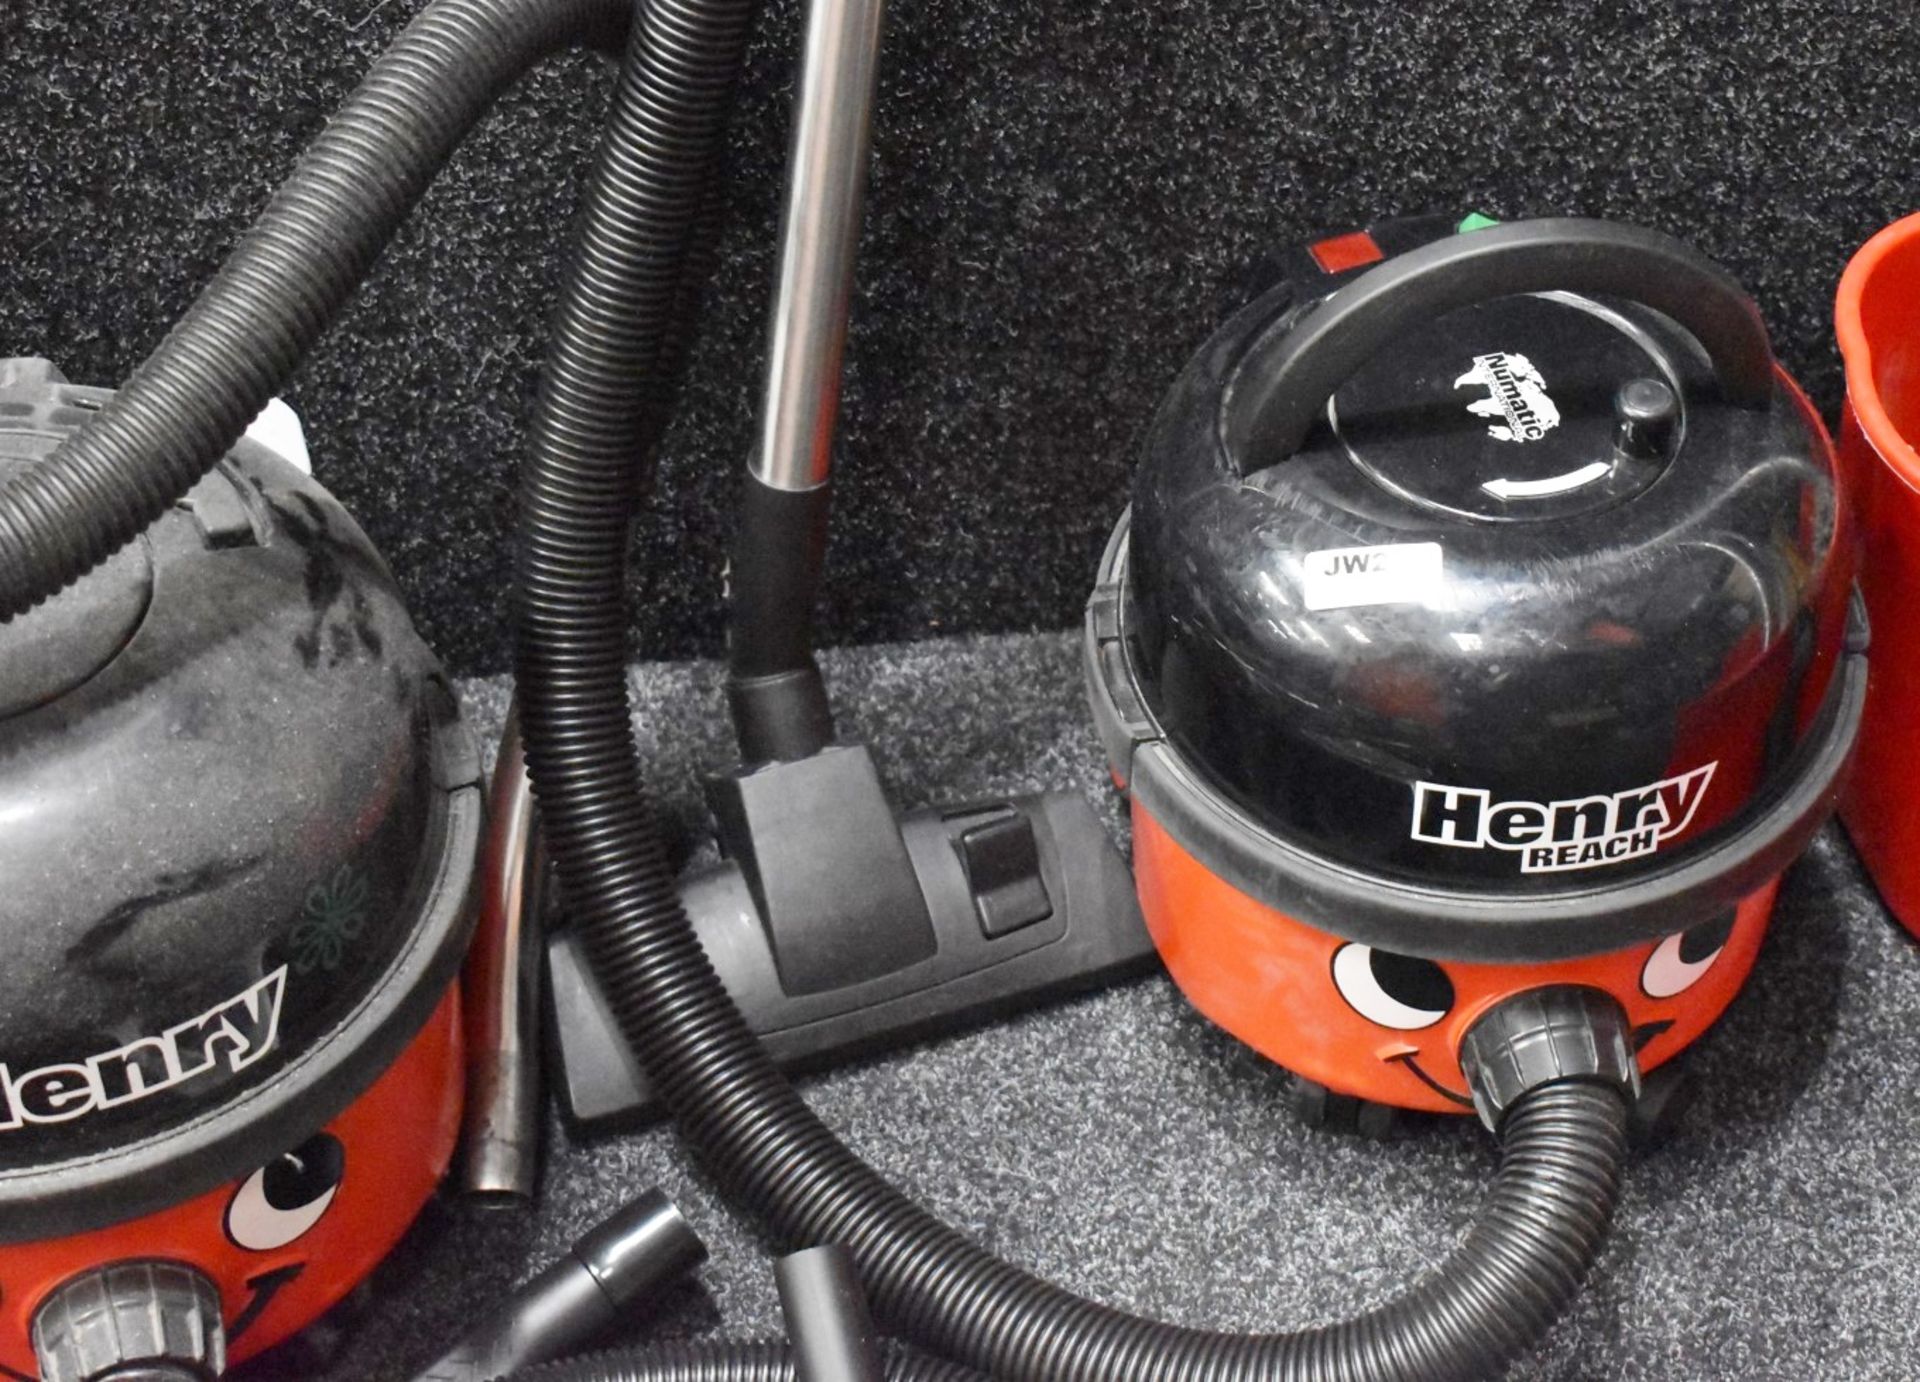 2 x Numatic Henry Hoovers With Accessories - Image 4 of 6